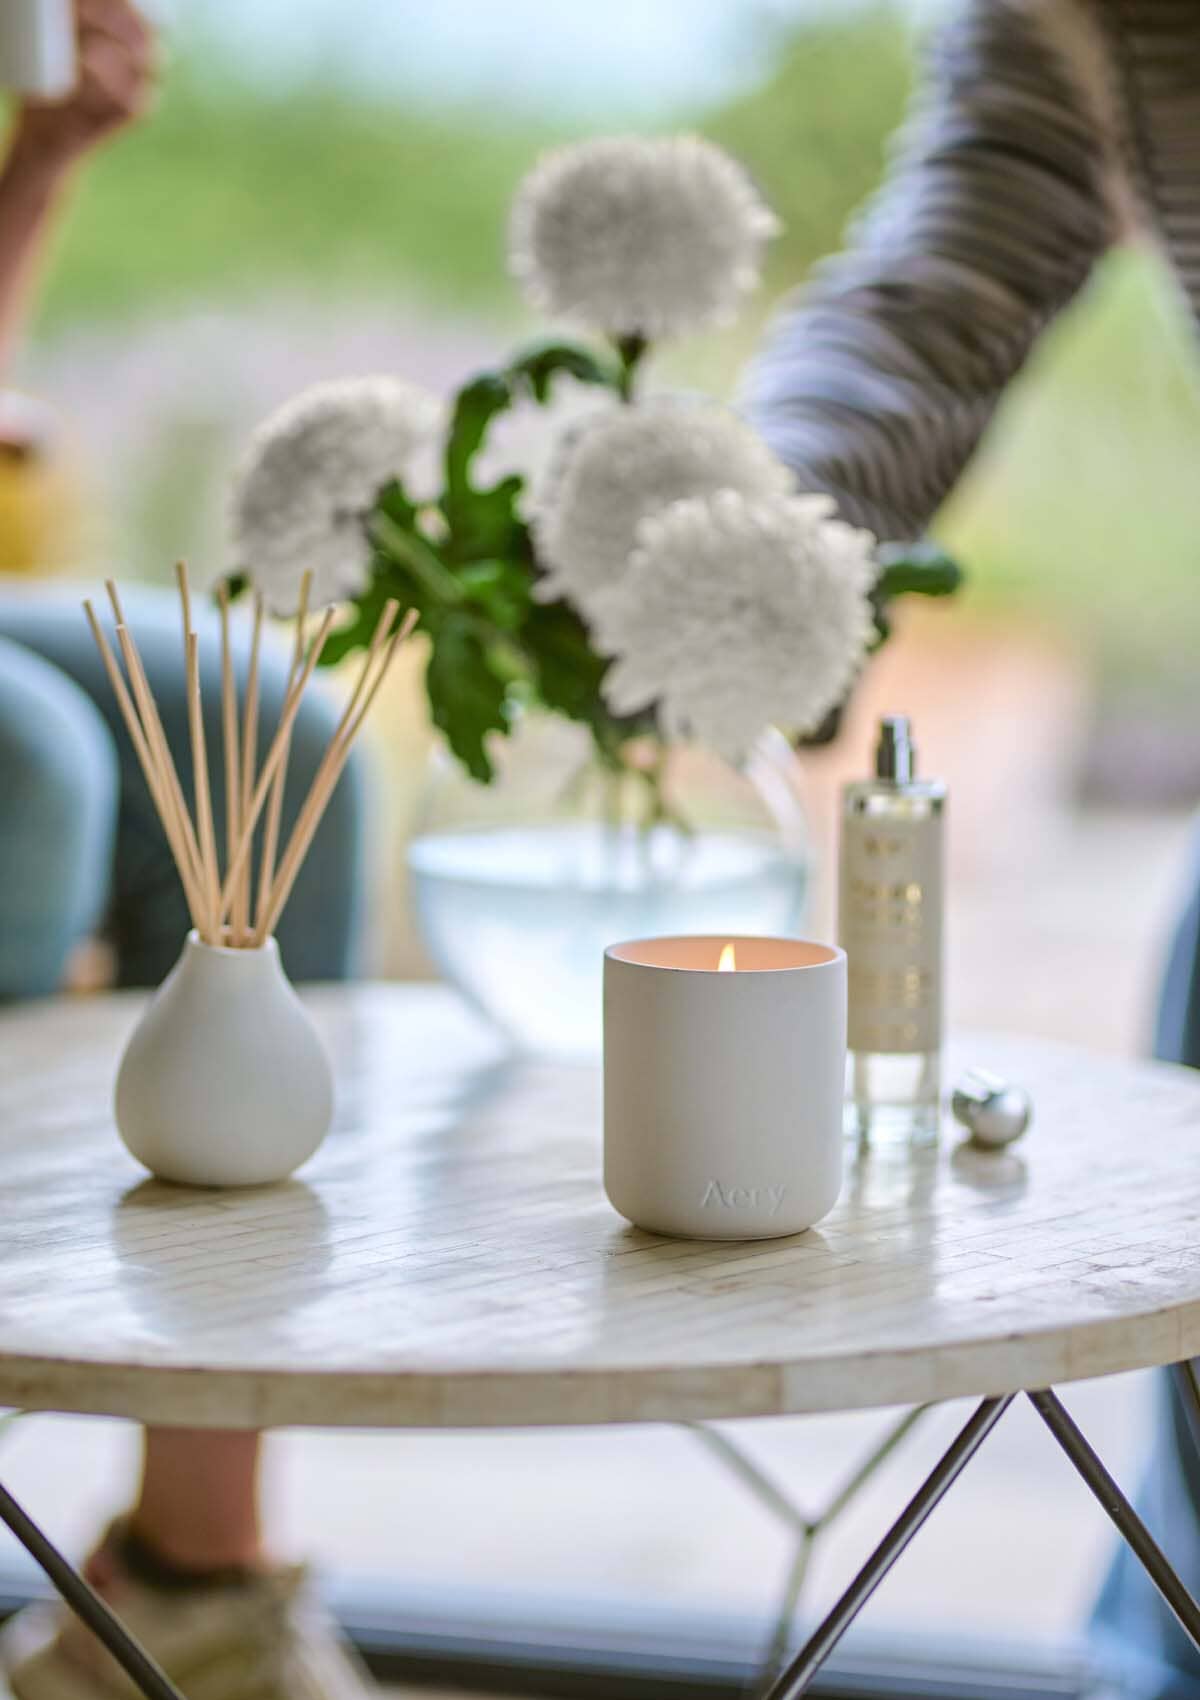 White Nordic Cedar candle by Aery displayed next to nordic cedar diffuser and room mist and vase of white flowers placed on cream circle table